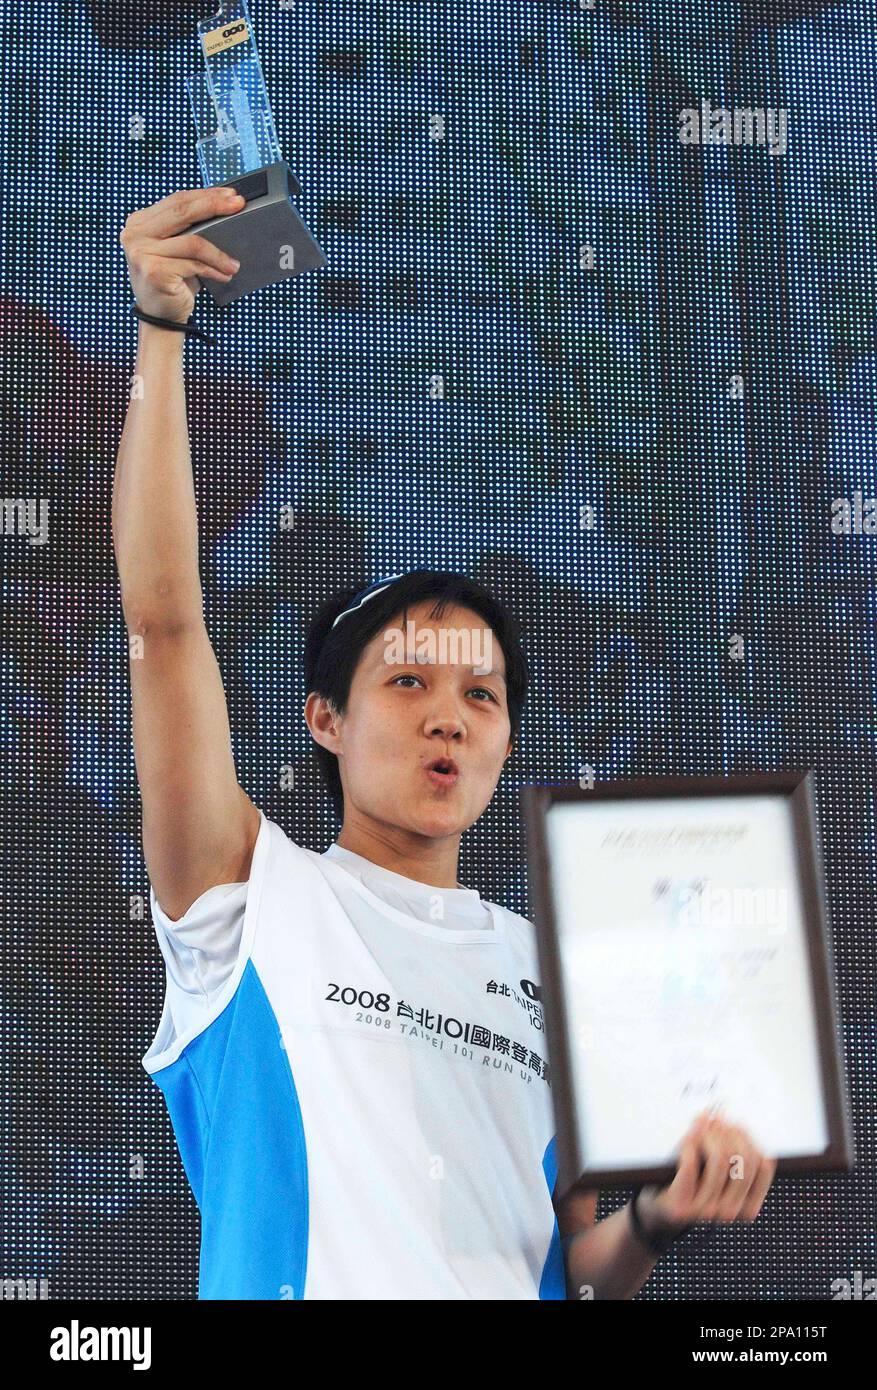 Taiwan's Li Shiao-yu proudly shows off their trophy and certificate after wining the 2008 TAIPEI 101 Run Up Race to run up stairs up to 91st floor of the 101-story building in women's category Sunday, June 15, 2008, in Taipei, Taiwan. (AP Photo/Chiang Ying-ying) Stock Photo